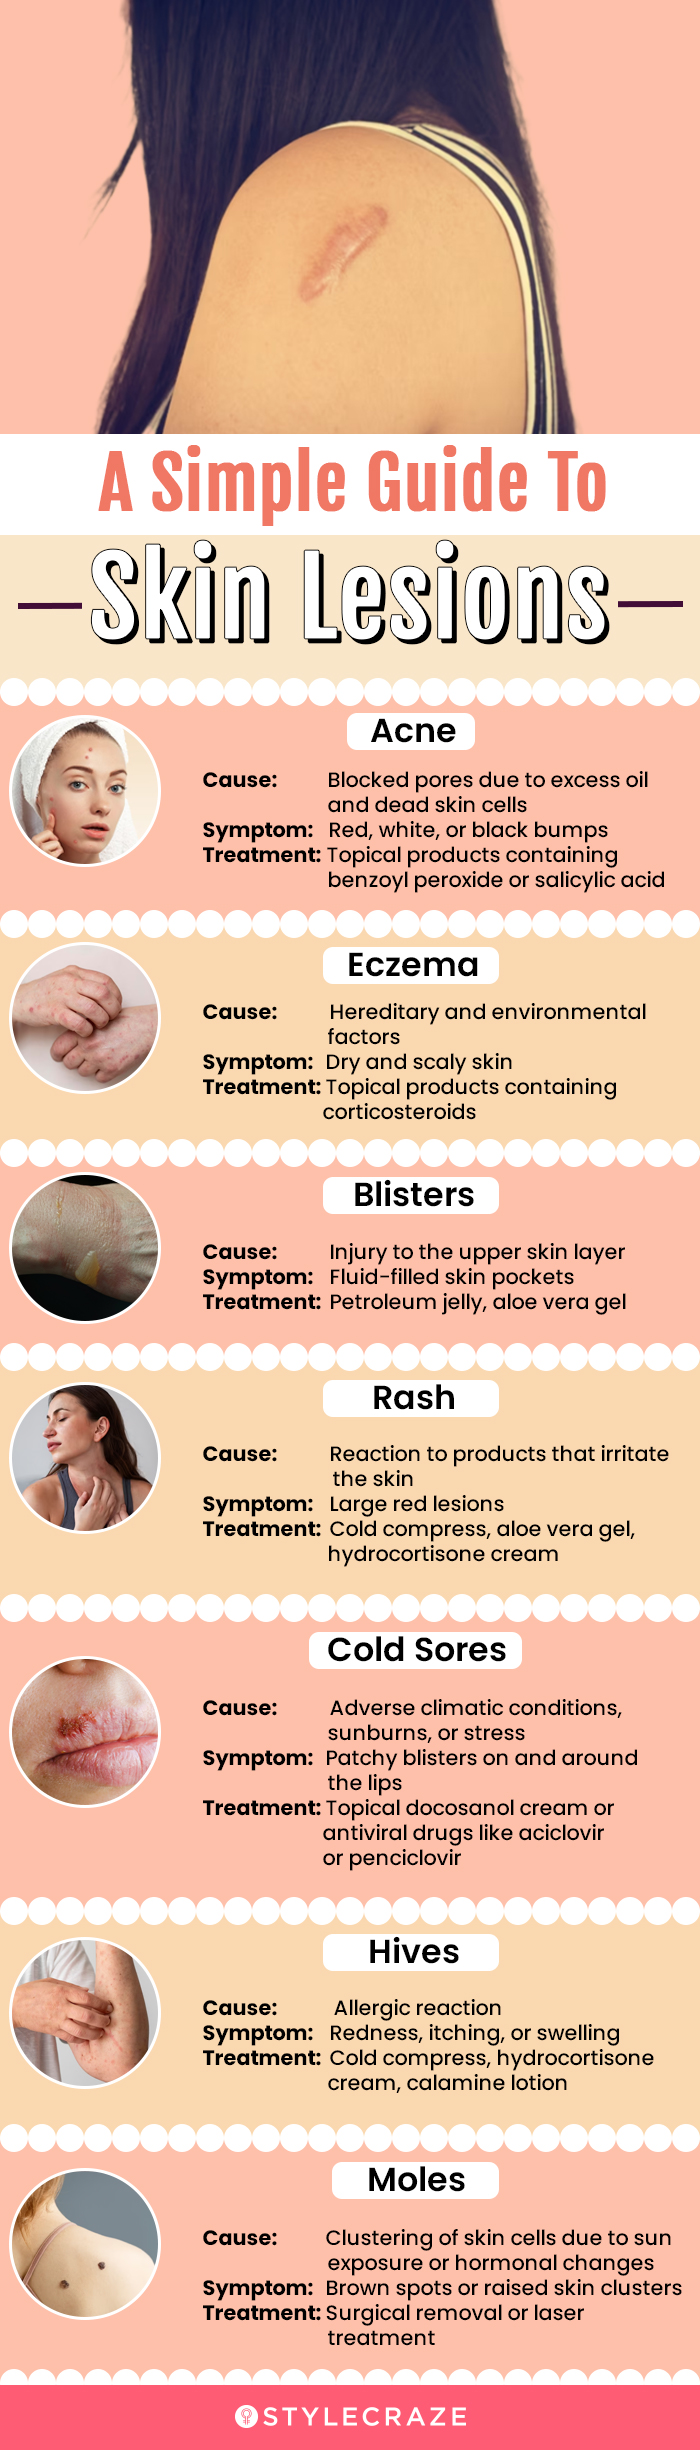 a simple guide to skin lesions (infographic)